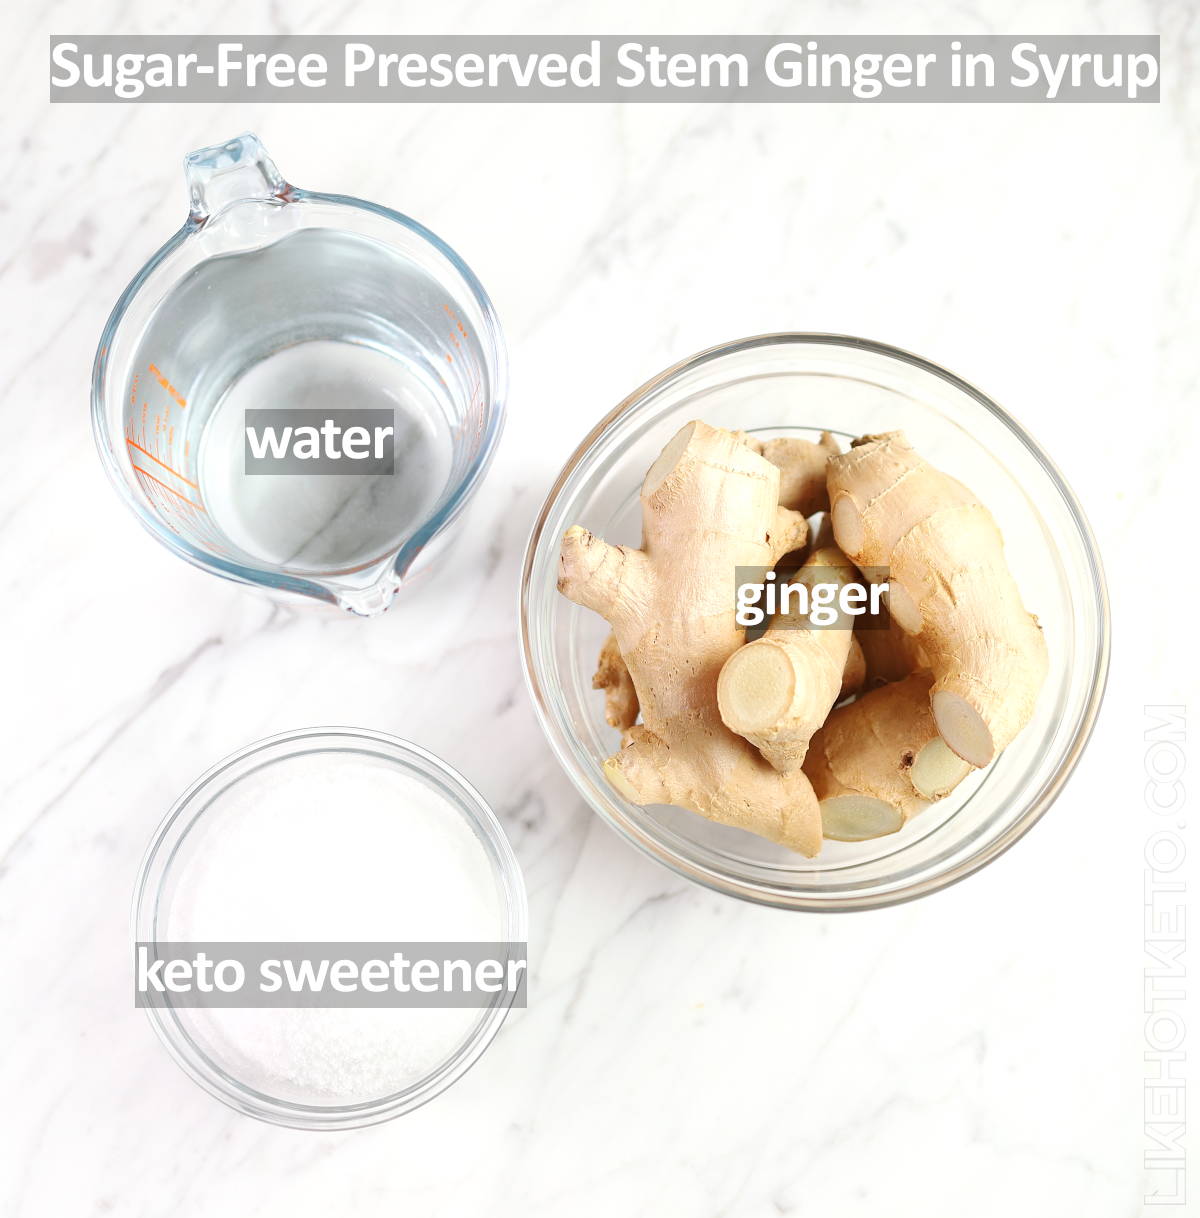 Ingredients for keto preserved ginger - water, sweetener and stem ginger.